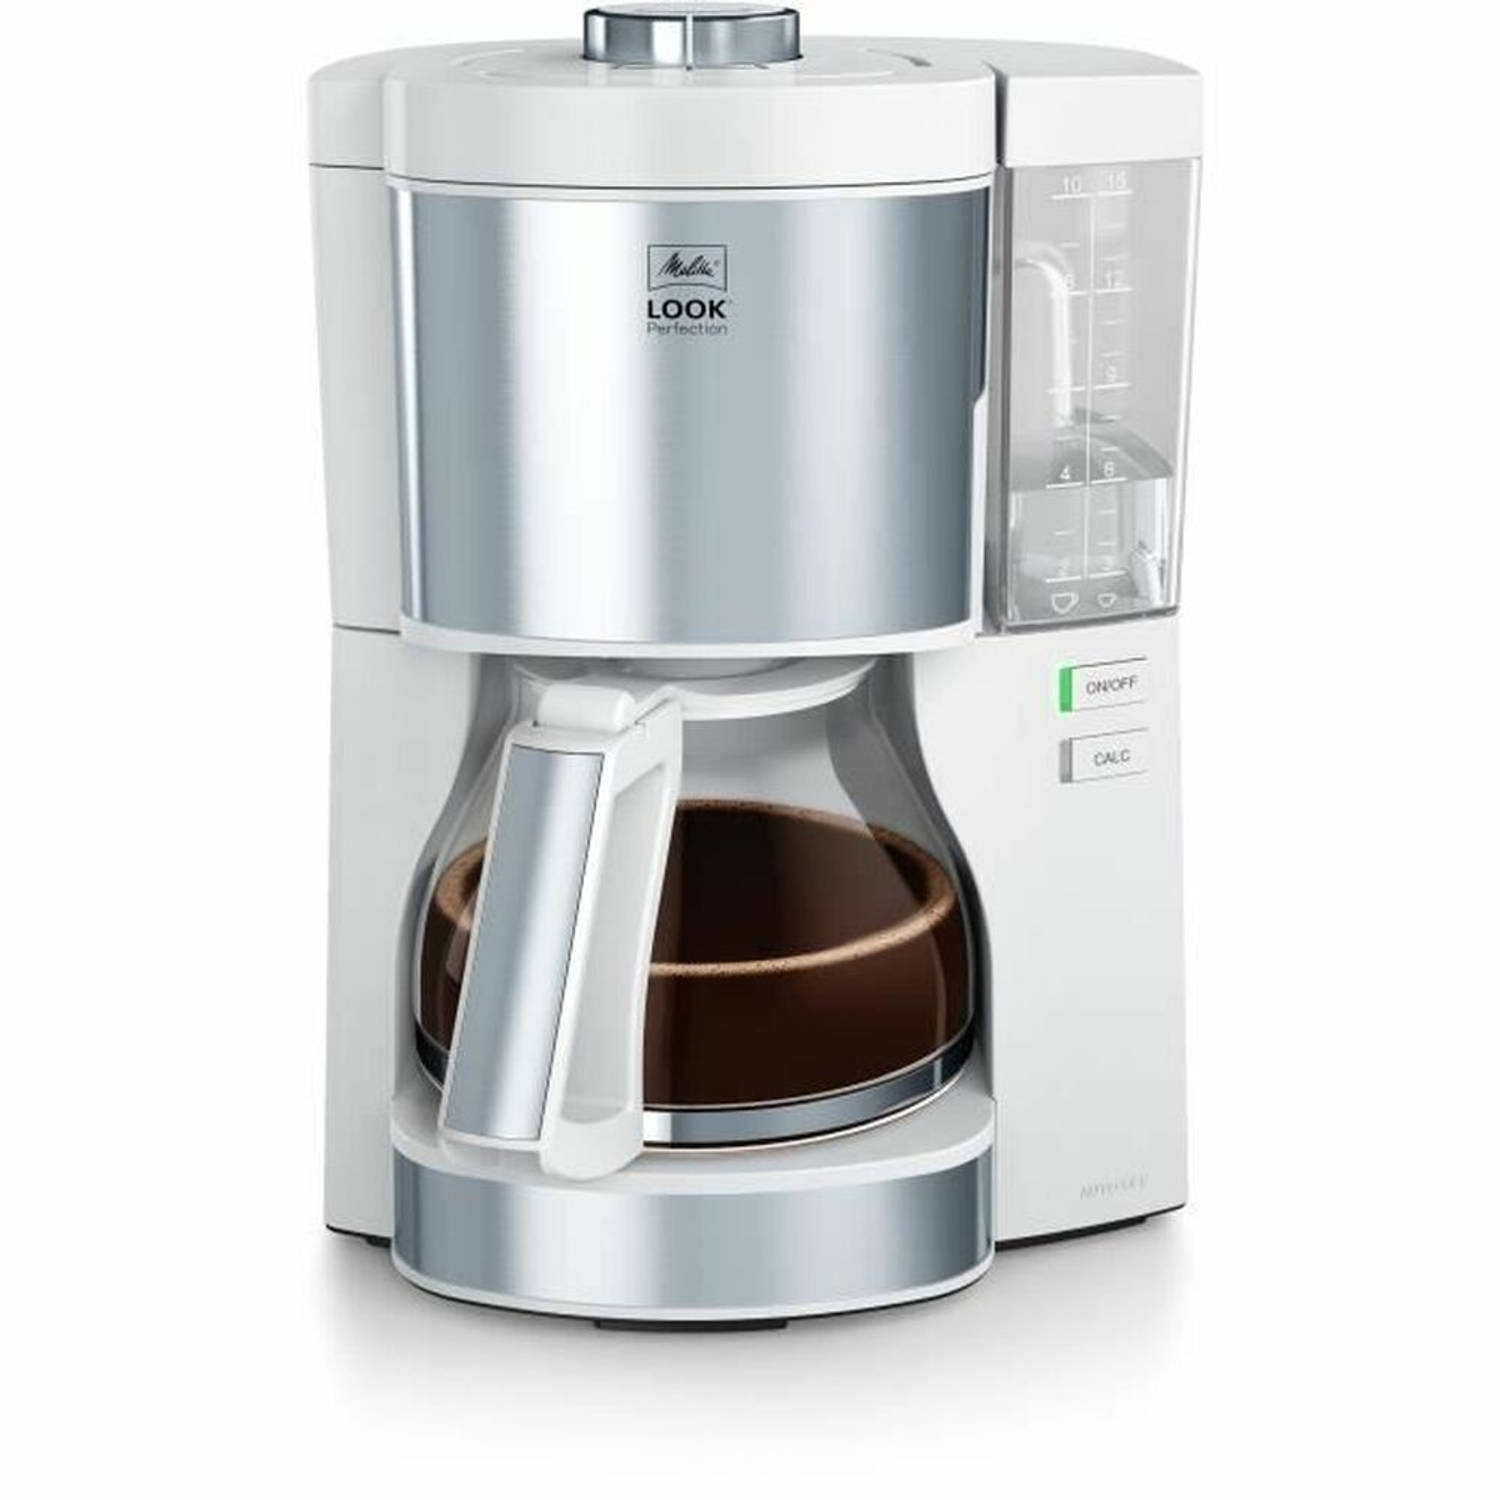 MELITTA - 1025-05 - FILTERKOFFIEFILTER Look V Perfection - wit